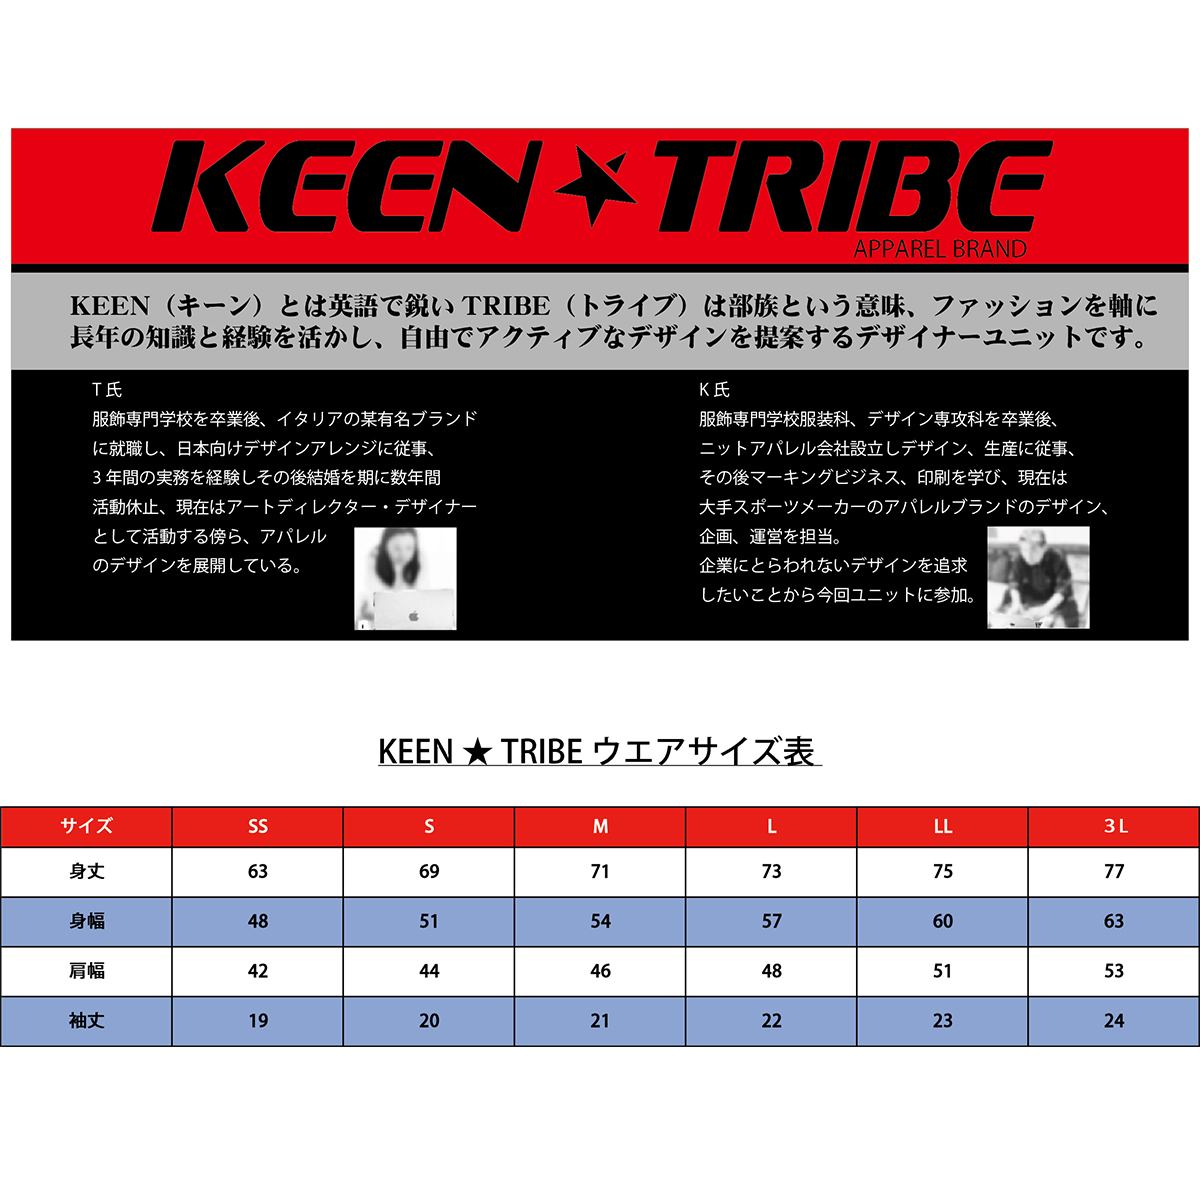 KEEN ★ TRIBE　KT-34(受注生産)